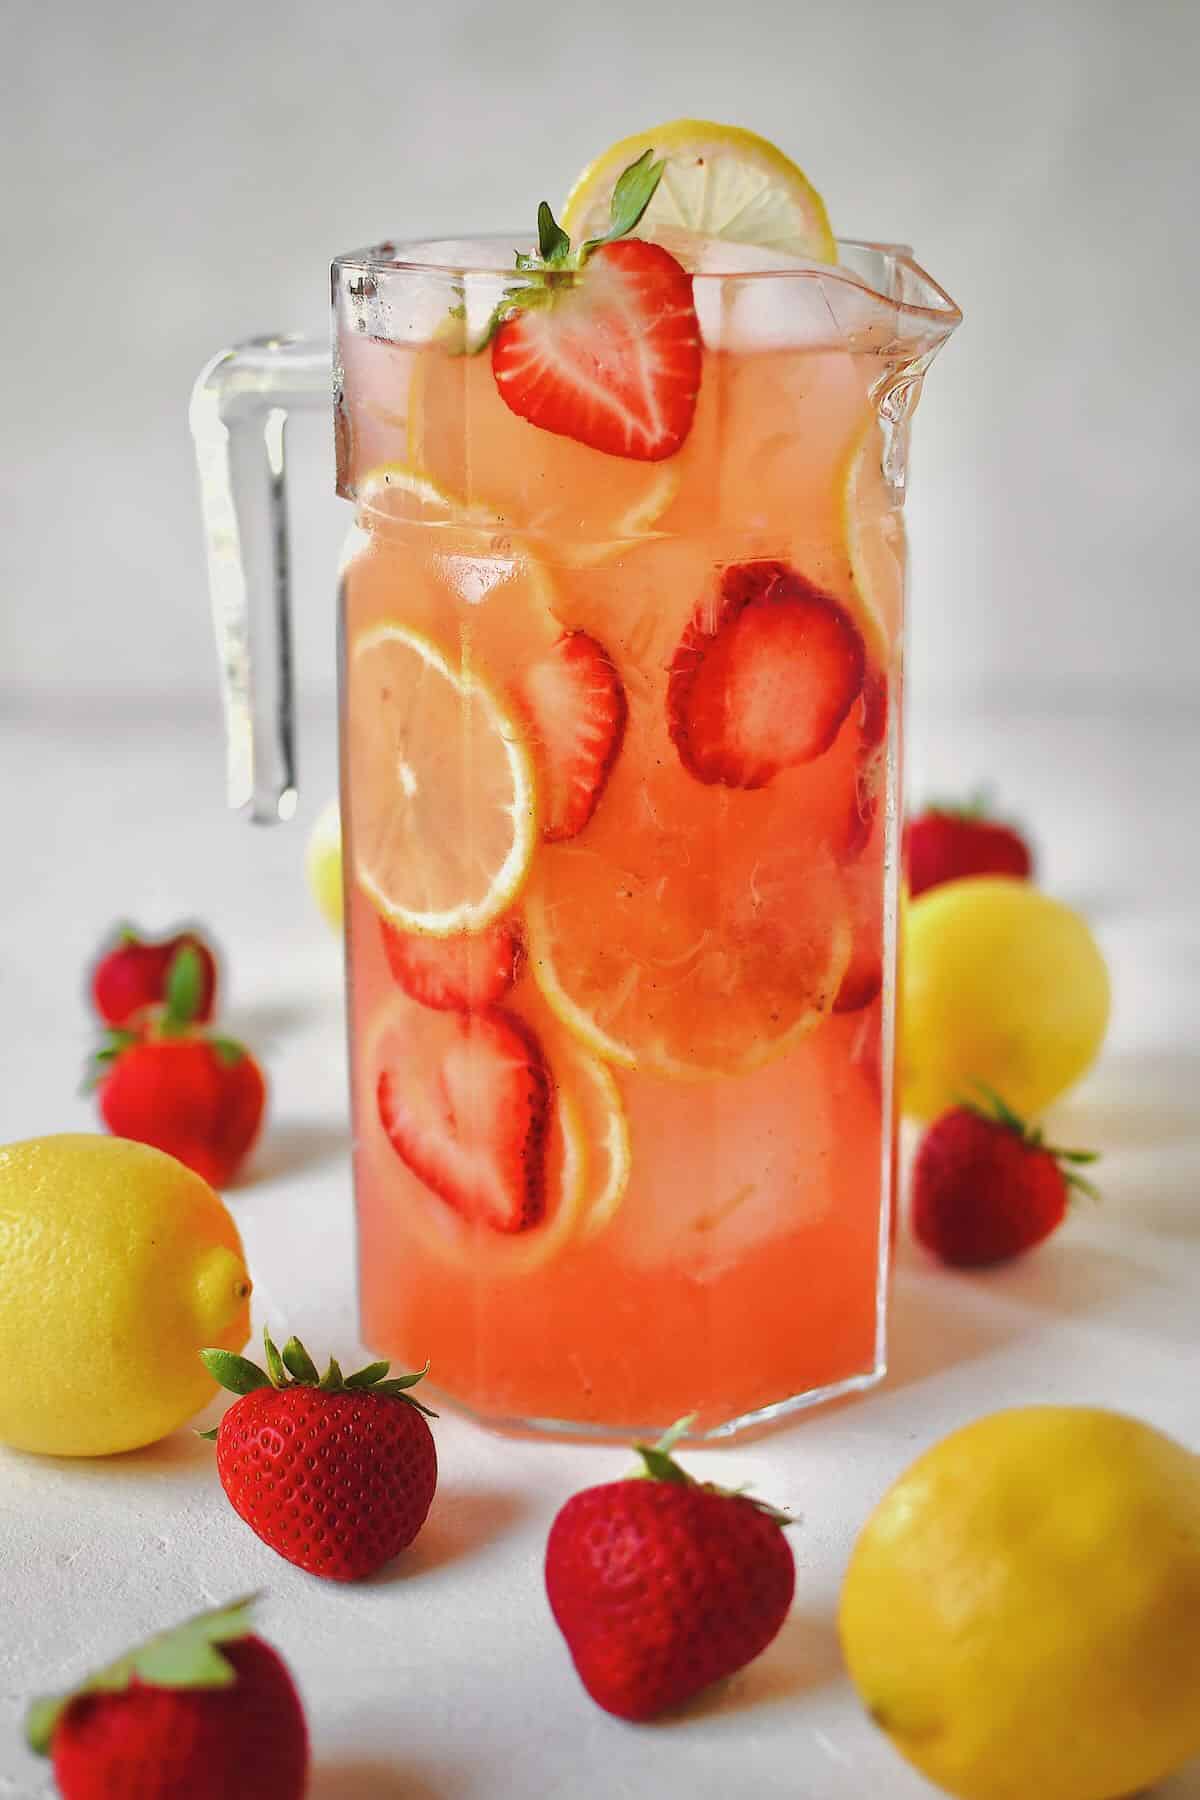 Pitcher of Strawberry Lemonade ready to be poured and enjoyed.